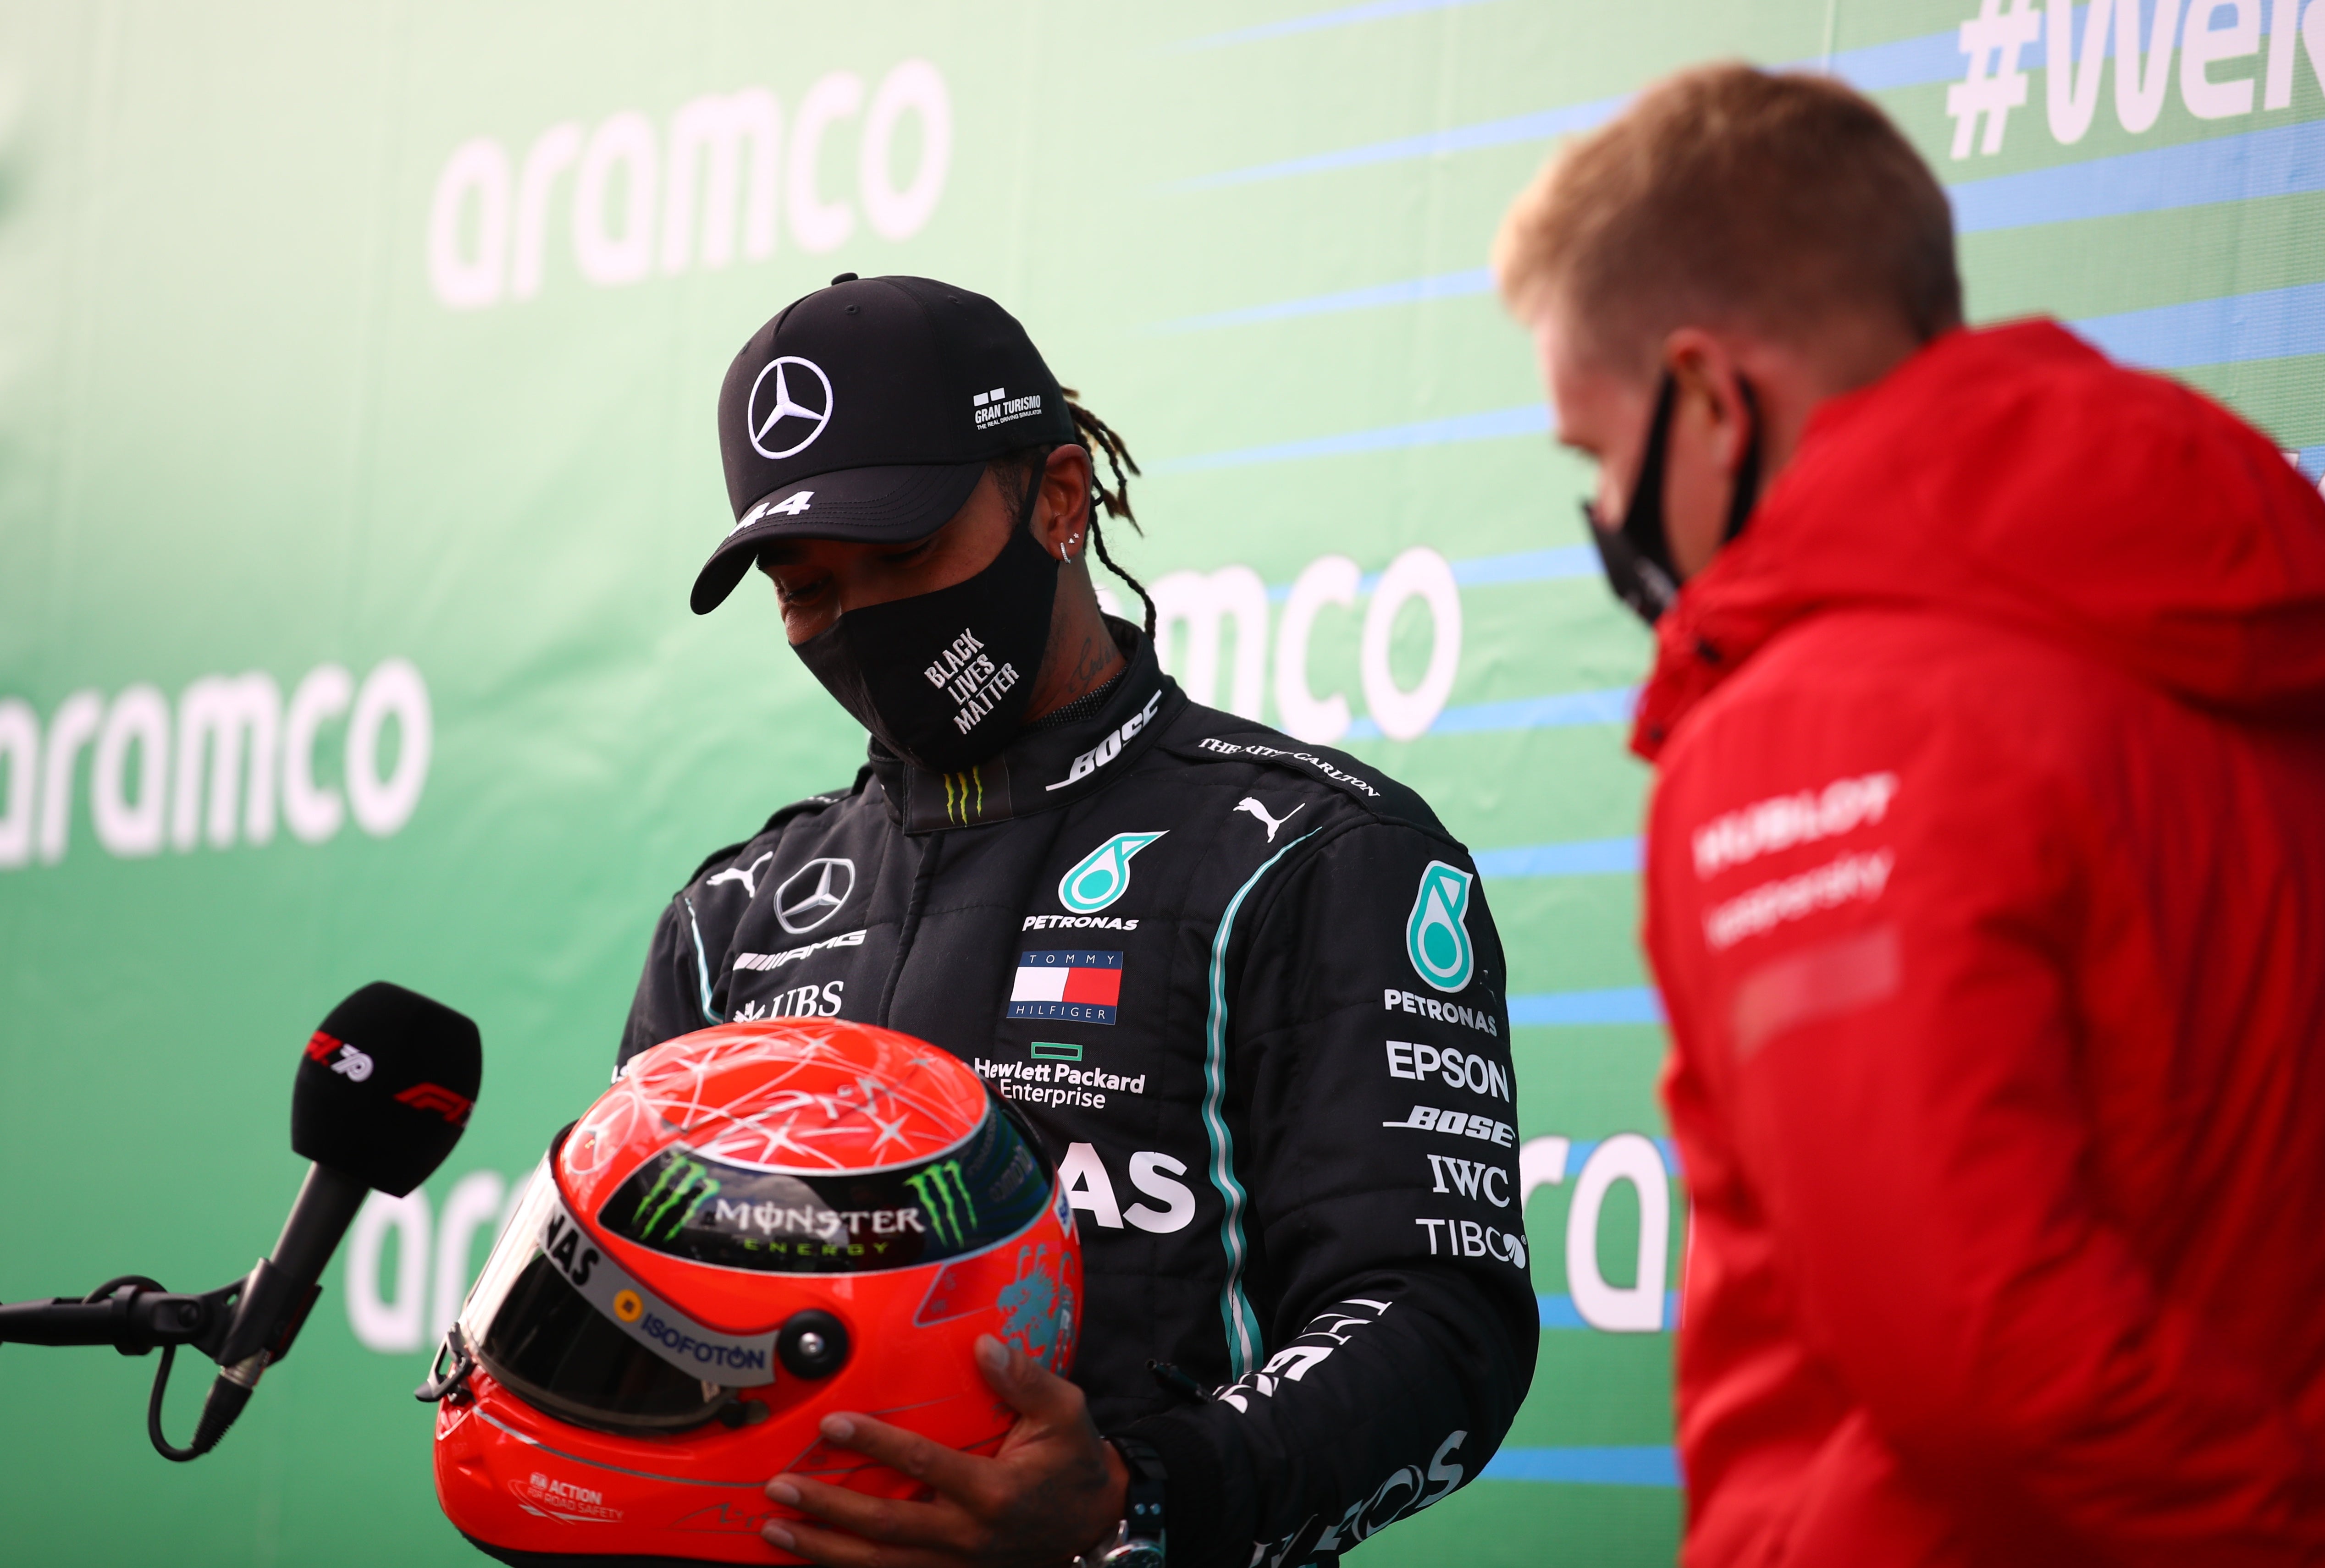 Lewis Hamilton is presented with one of Michael Schumacher’s helmets by his son Mick